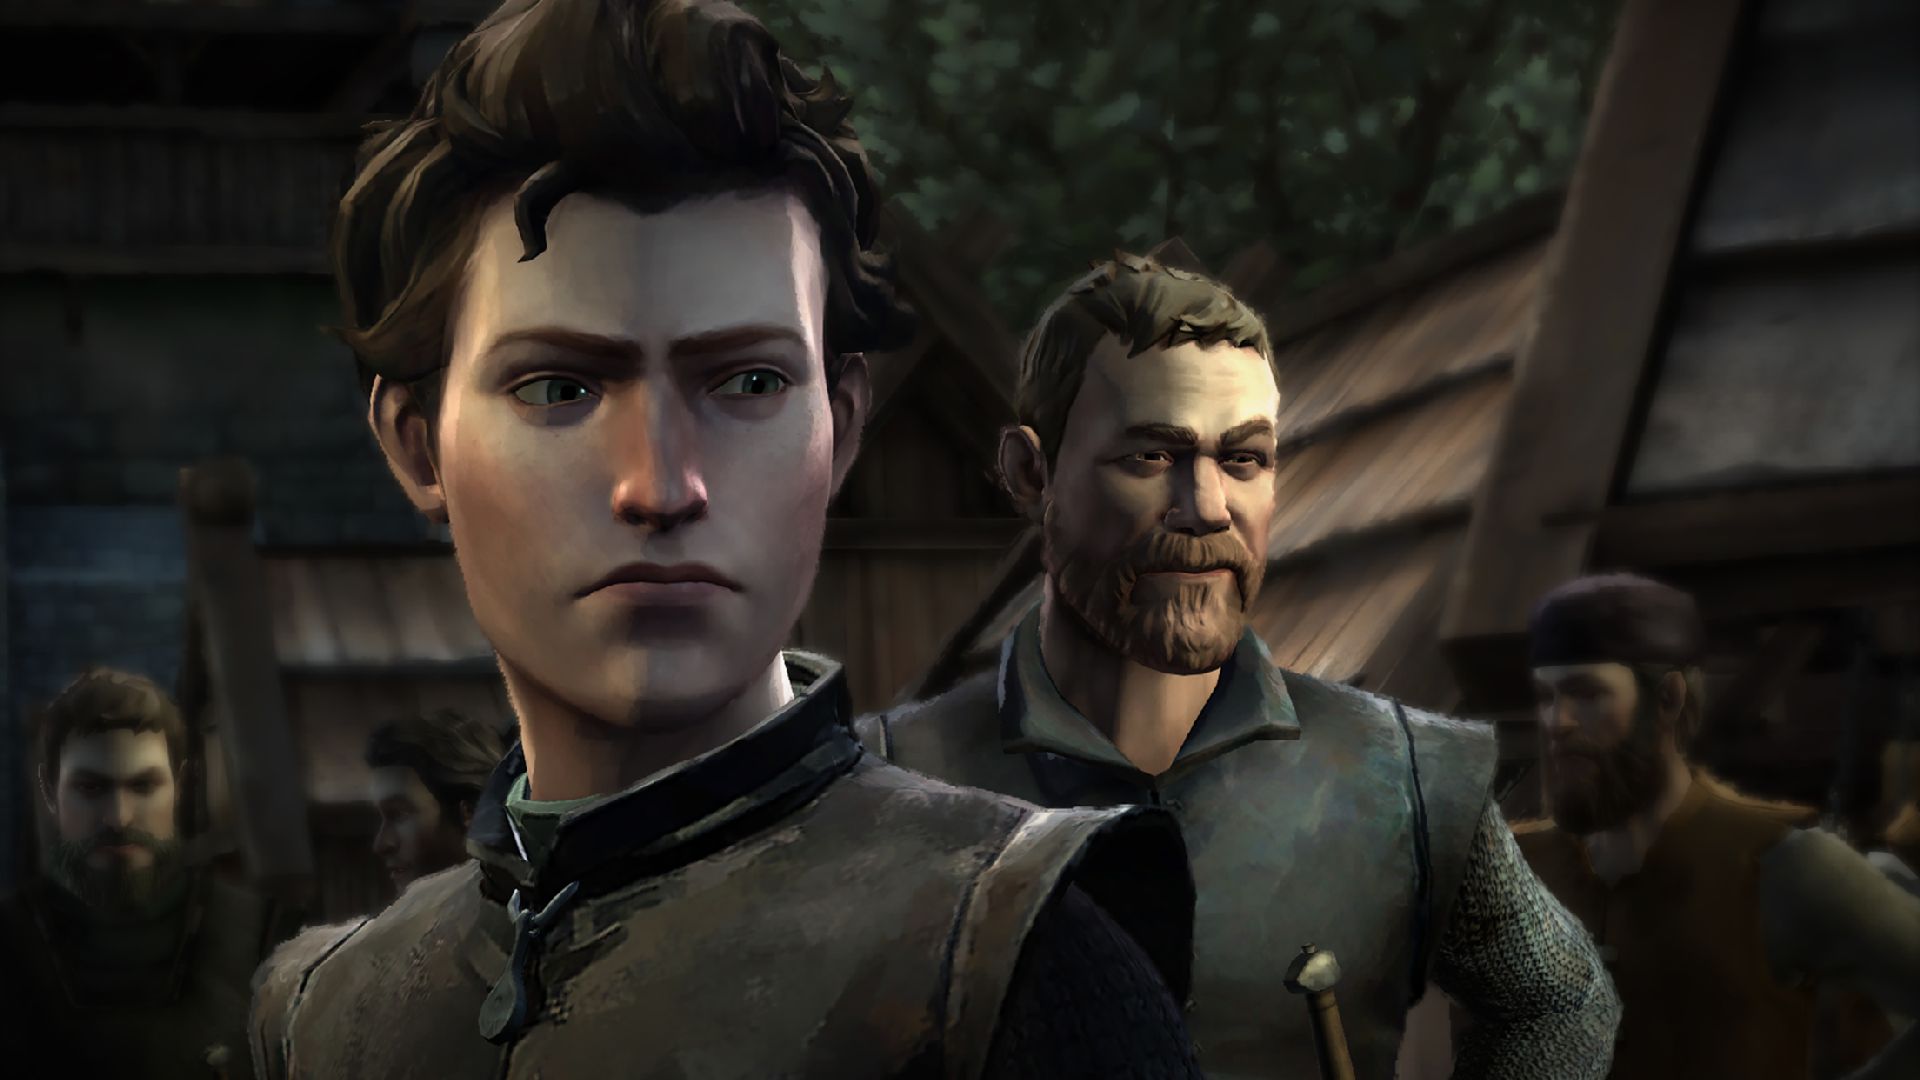 TellTale’s “Game of Thrones: Iron From Ice” - Telltale and Game of Thrones is like a match made in heaven.